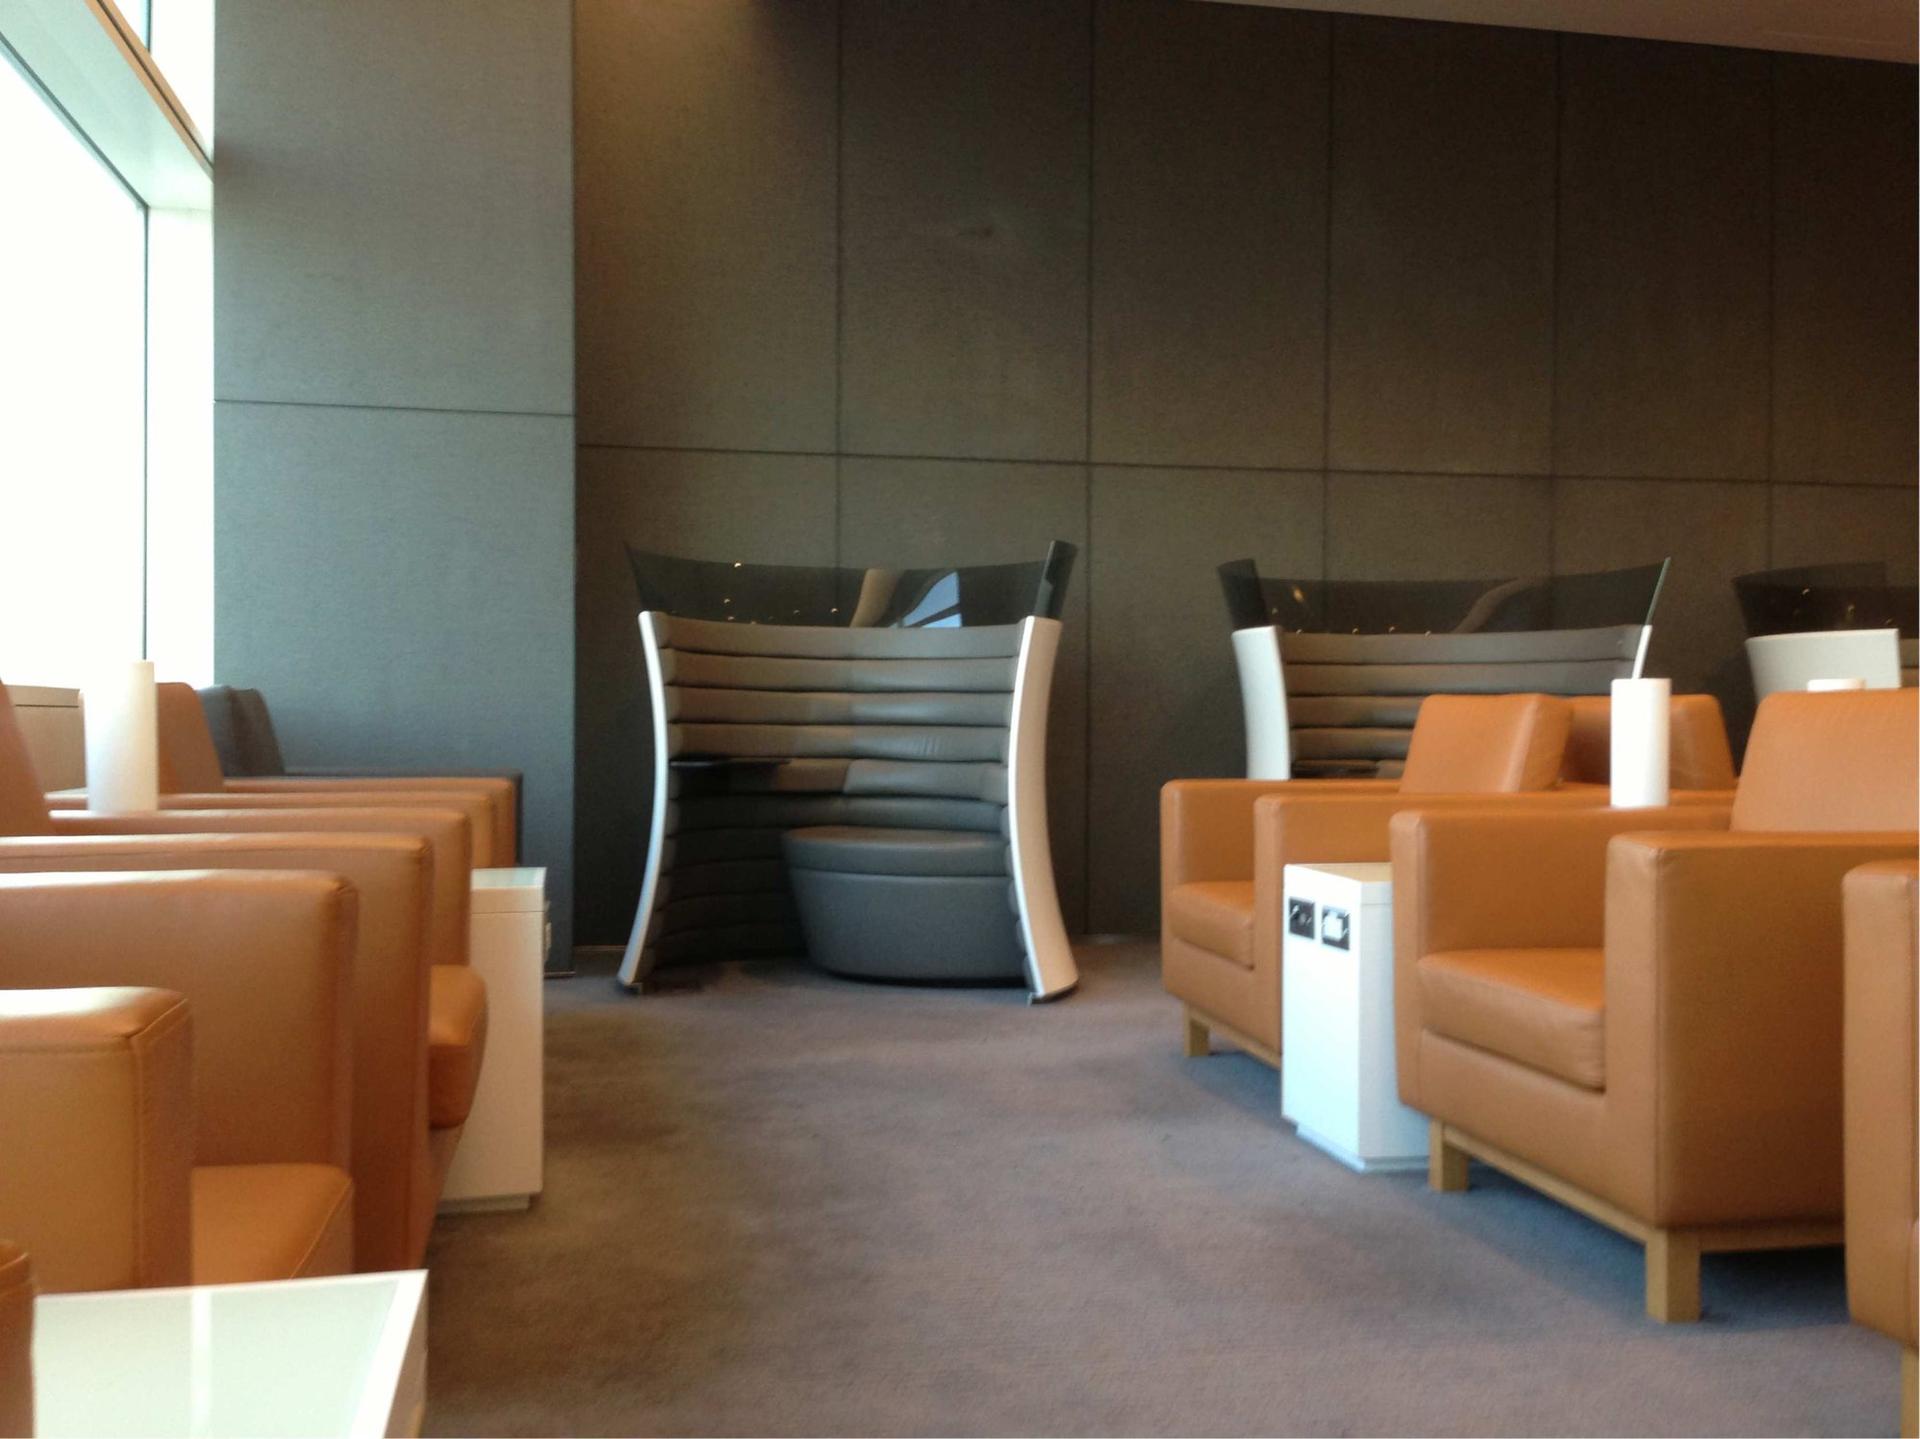 Cathay Pacific First and Business Class Lounge image 9 of 74